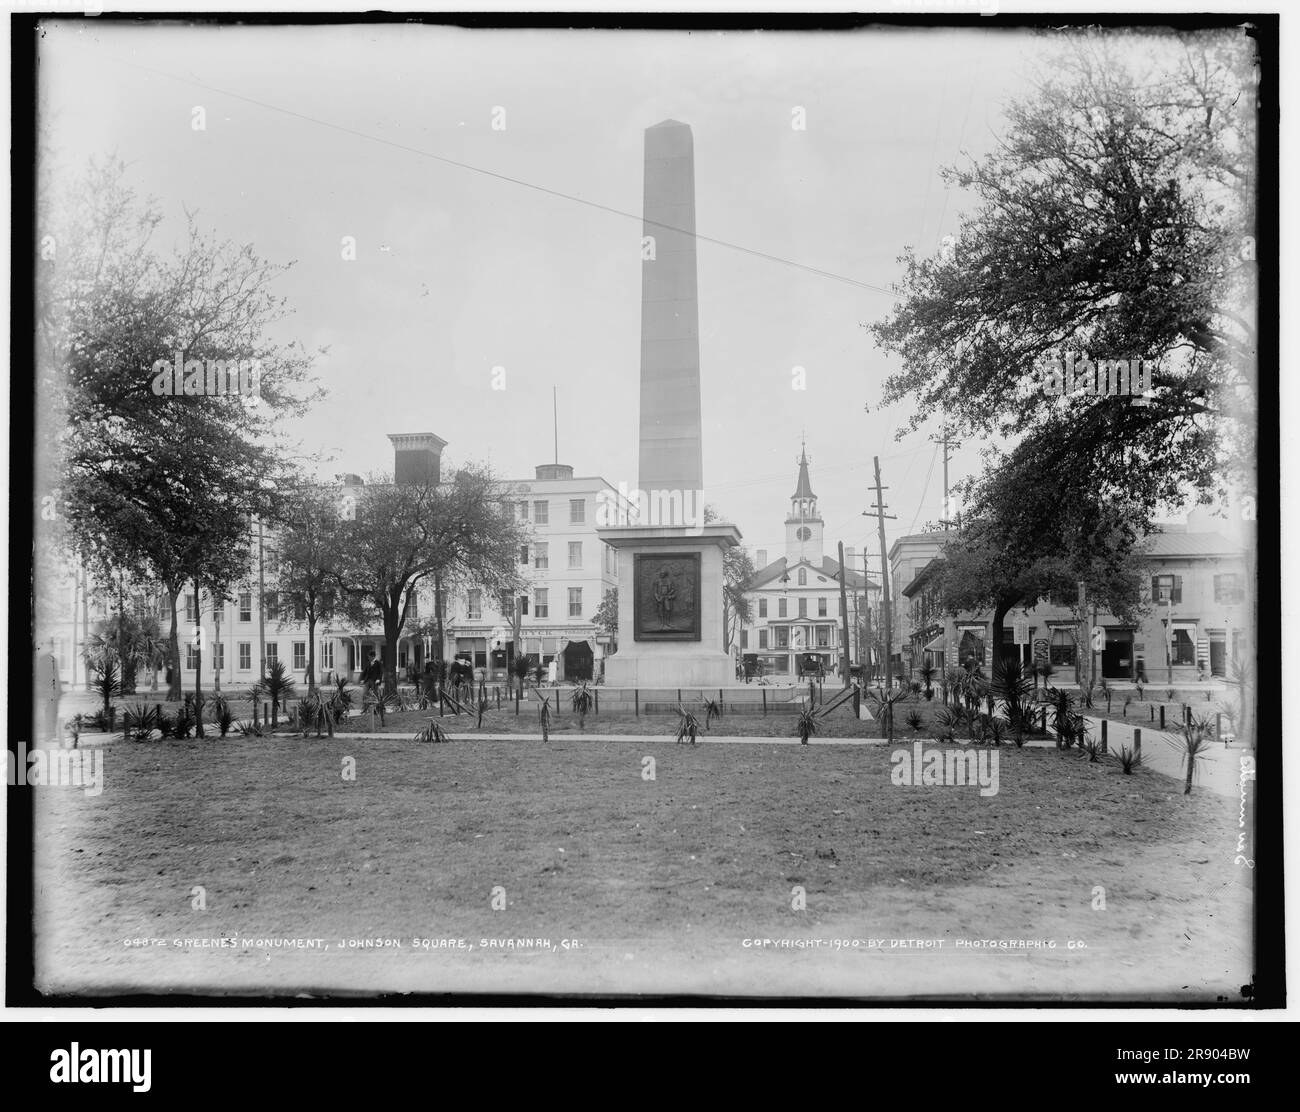 Greene's Monument, Johnson Square, Savannah, Ga., c1900. The Nathanael Greene Monument, designed by William Strickland, commemorates Major-General Nathanael Greene, an American military officer and planter who served in the Continental Army during the Revolutionary War. Greene's body was reinterred under the monument in 1902. Stock Photo